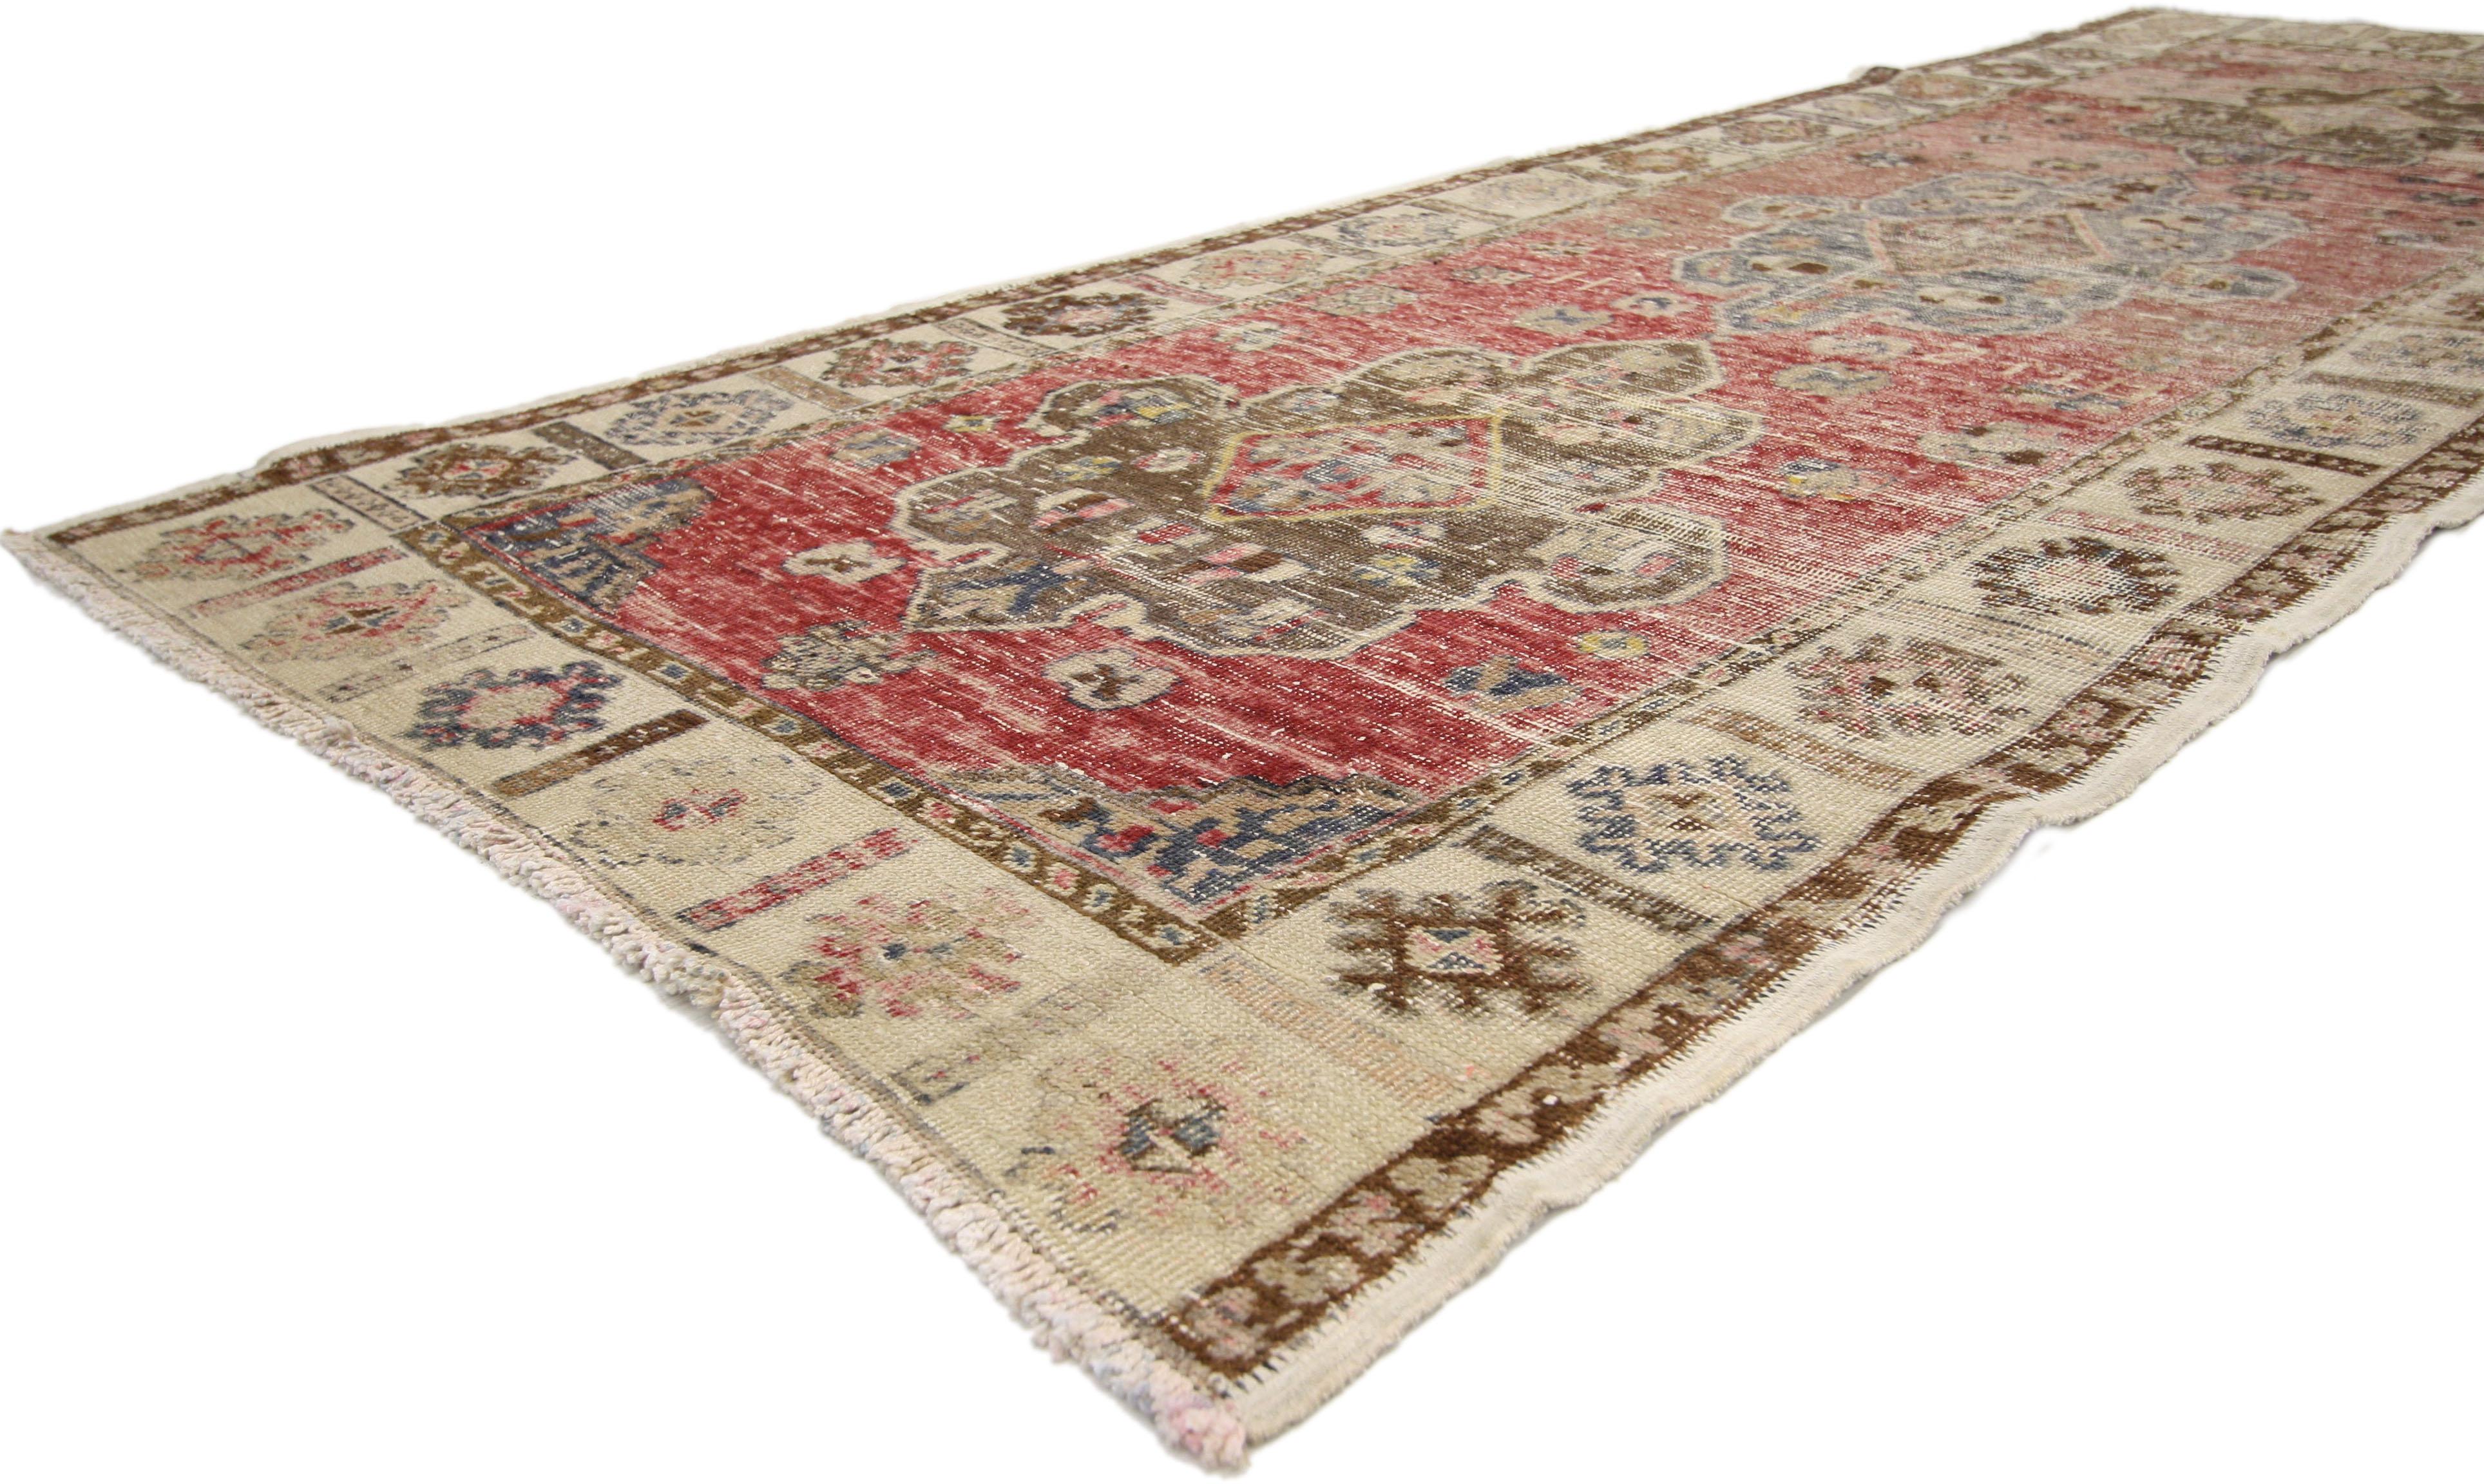 74675, distressed vintage Oushak runner. This distressed vintage Turkish Oushak runner features three central medallions in an abrashed red field surrounded by a geometric border. Rendered in variegated shades of red, rose, coffee, sienna, navy